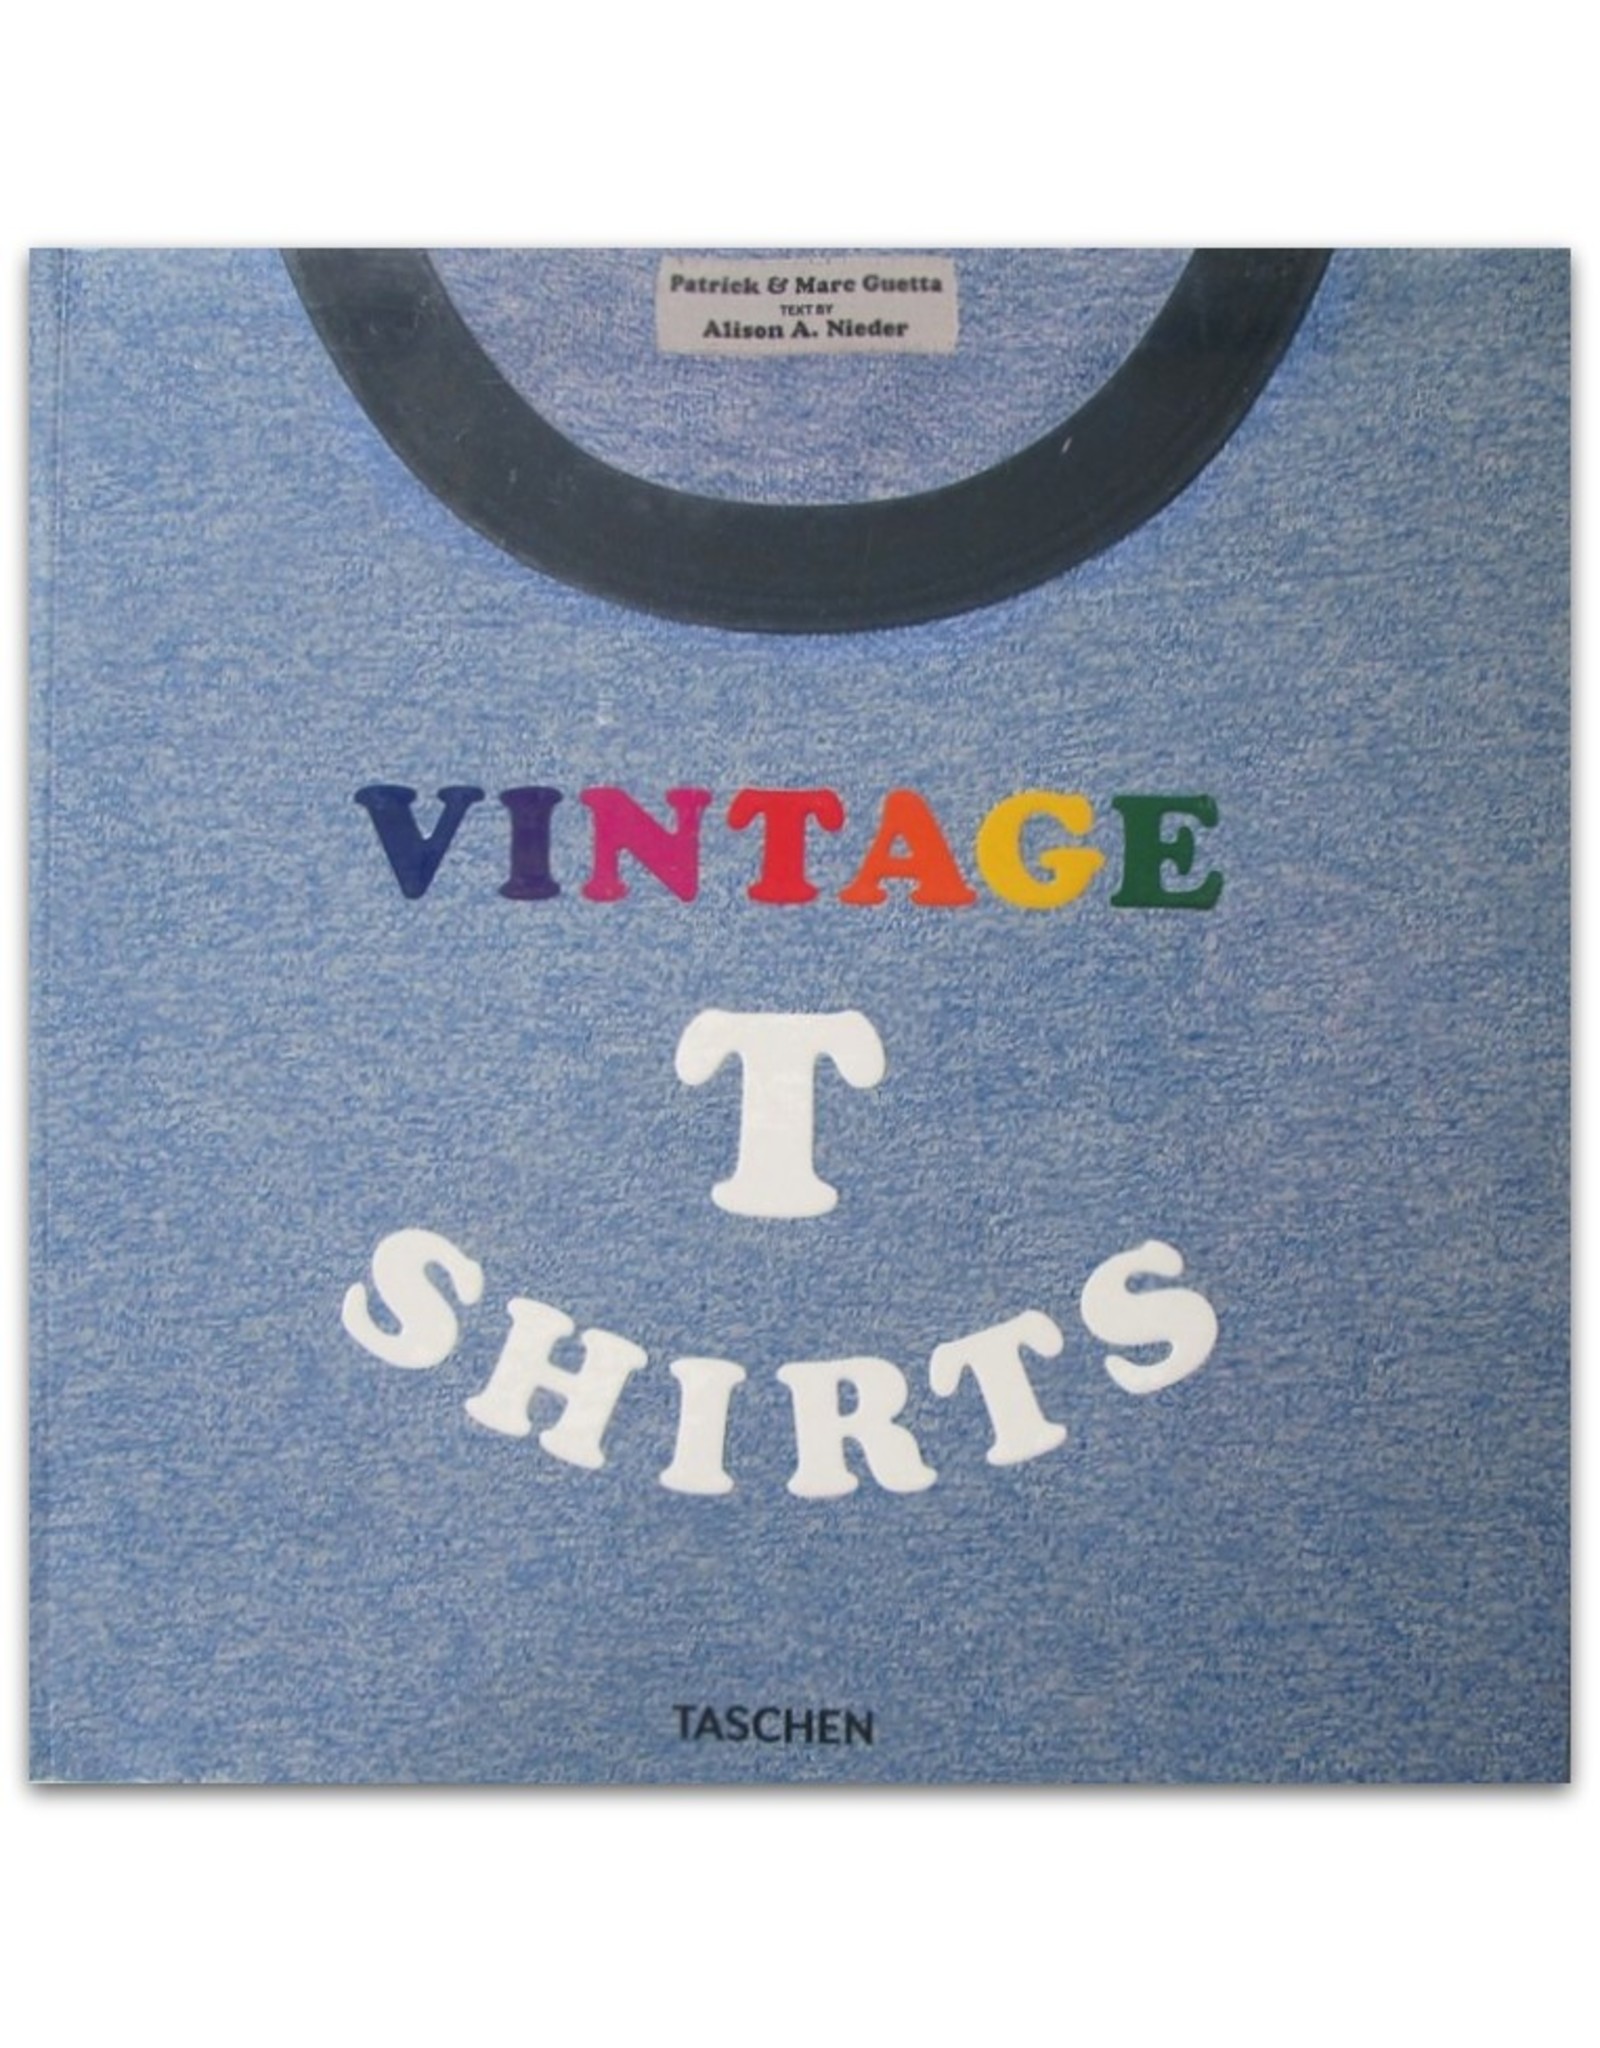 Patrick and Marc Guetta & Alison A. Nieder - Vintage T-shirts